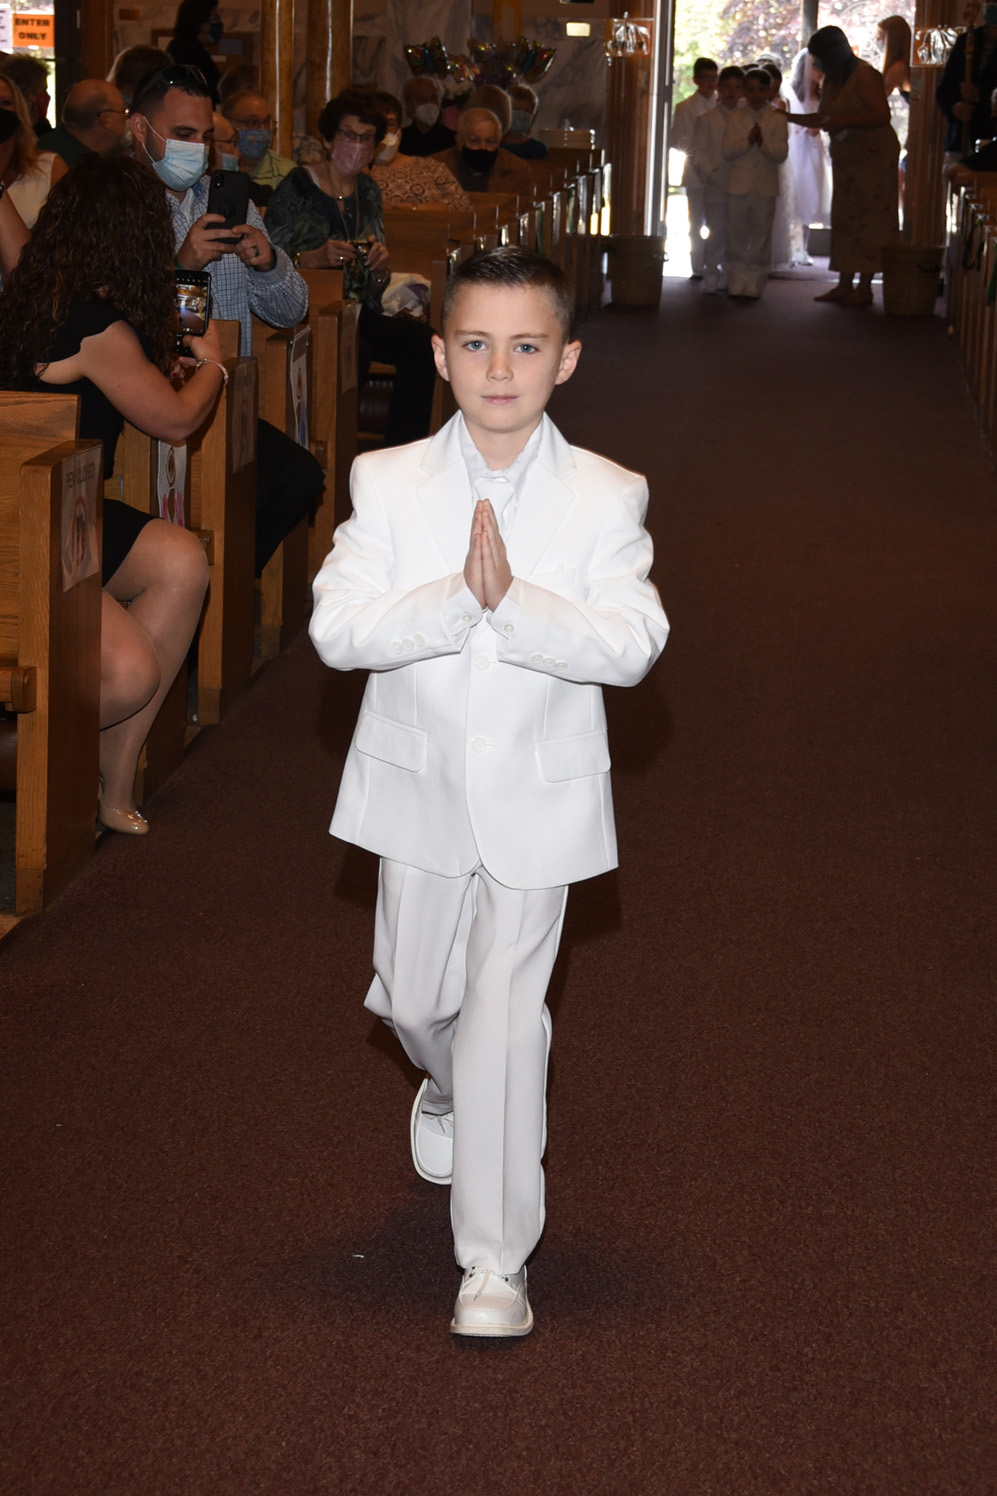 FIRST-COMMUNION-MAY-16-2021-33